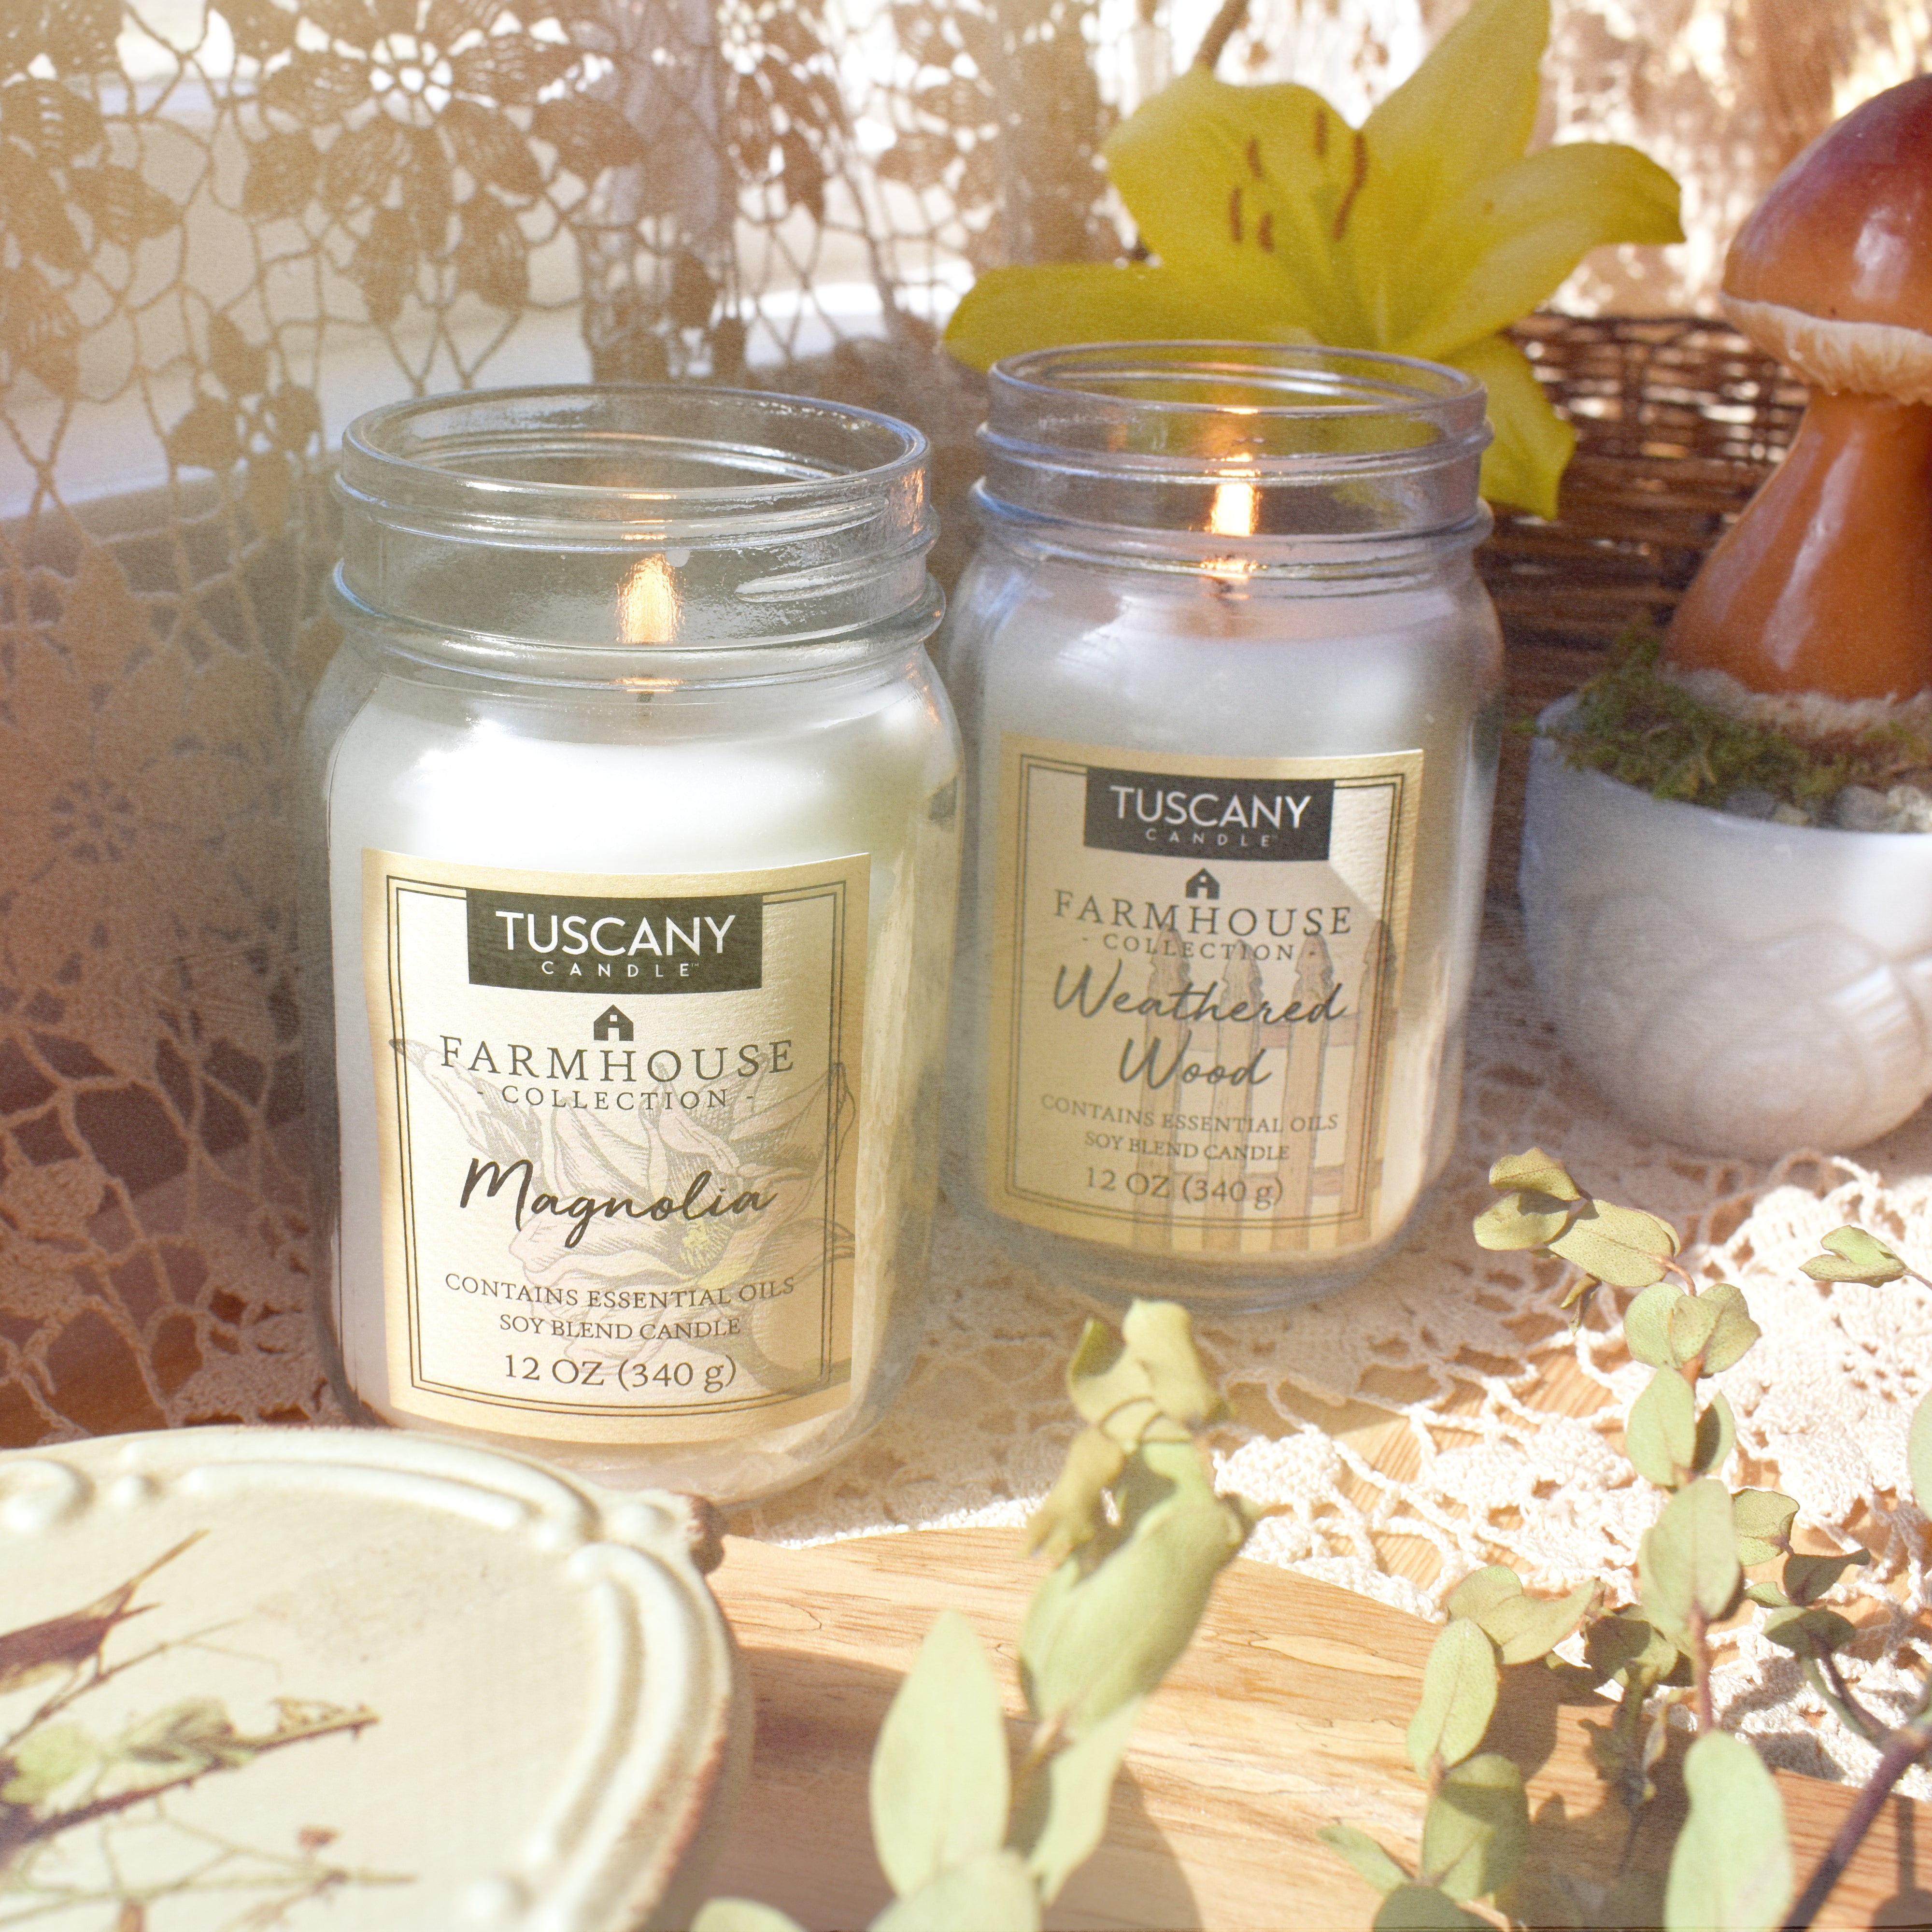 Two jars of Weathered Wood Scented Jar Candle (12 oz) – Farmhouse Collection by Tuscany Candle are sitting on a weathered wood table.